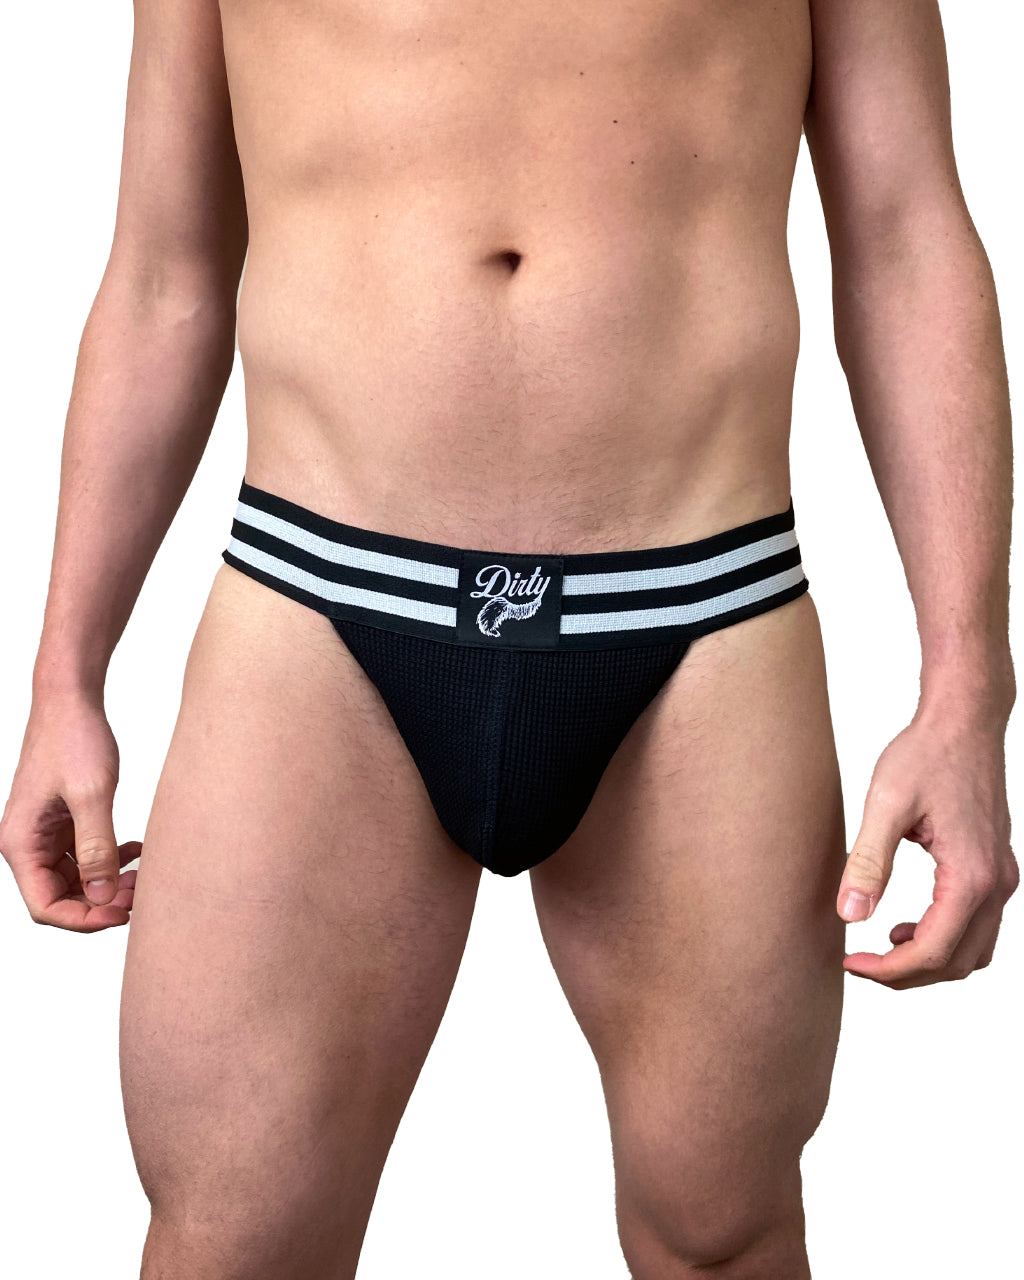 Pouched Athletic Waffle Jock Strap